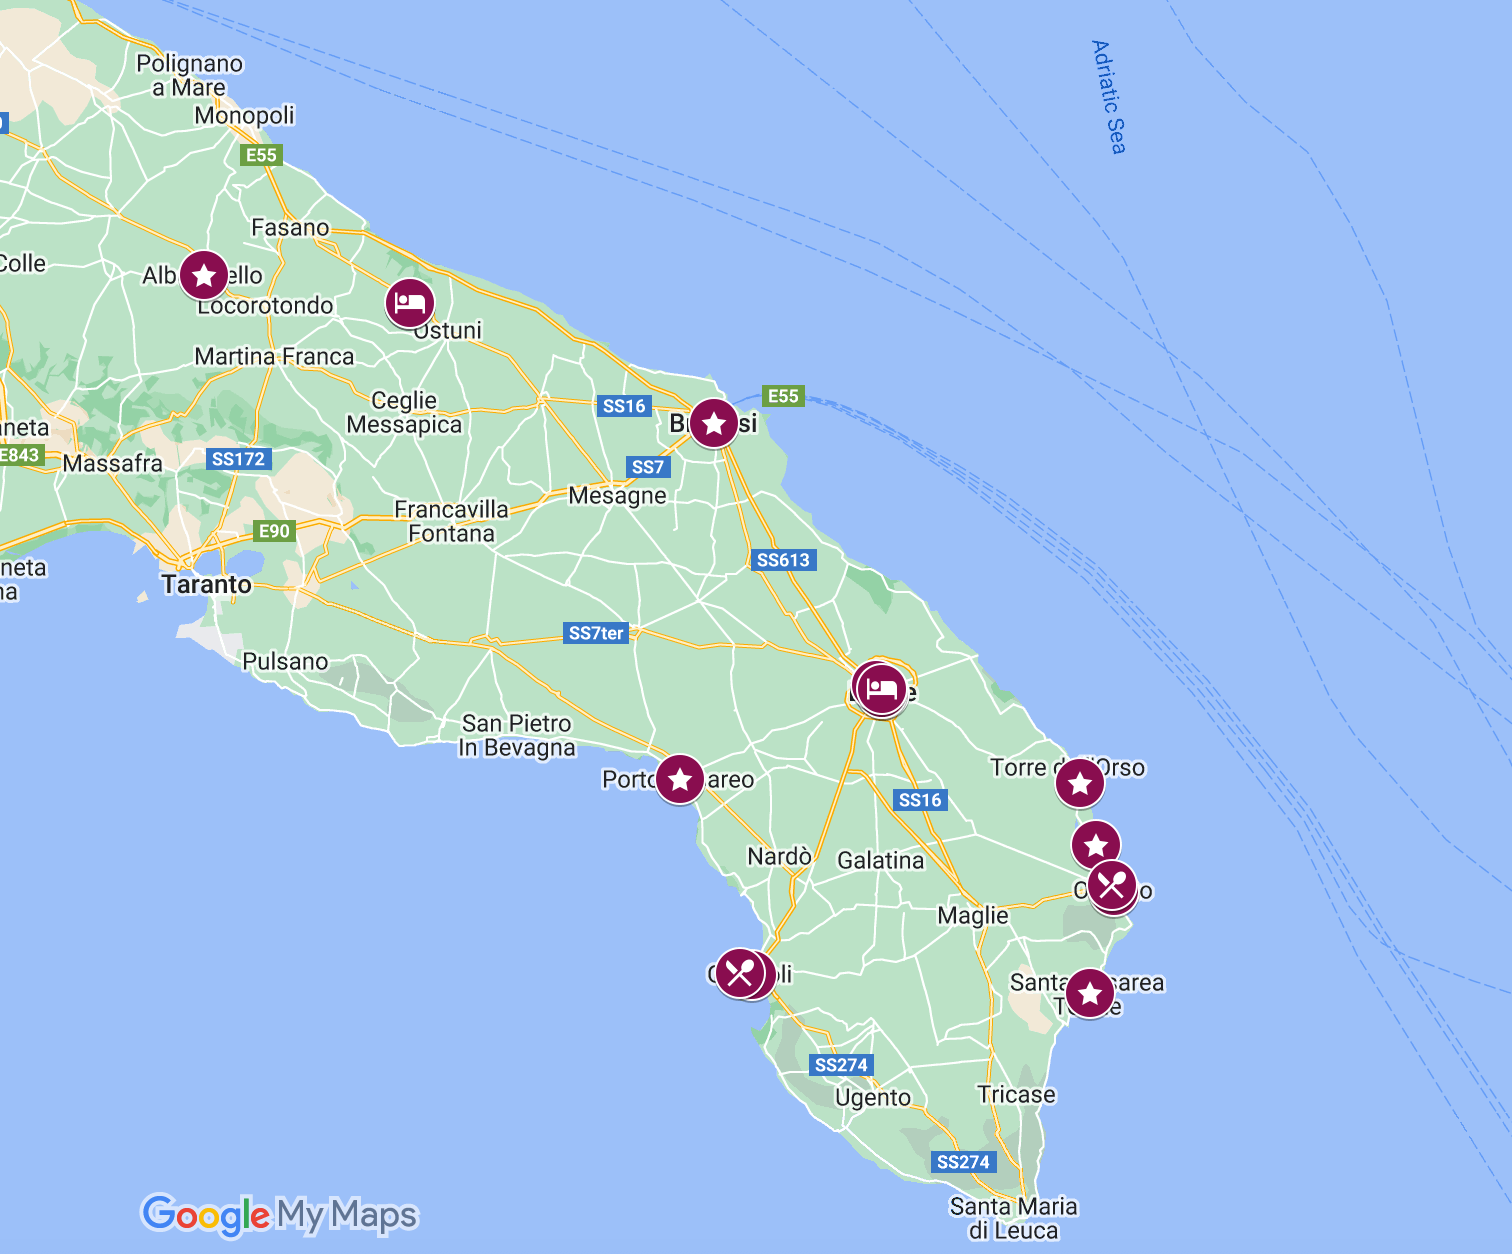 Google map screenshot of Puglia Italy with cities restaurants and attractions favorited with burgundy icons